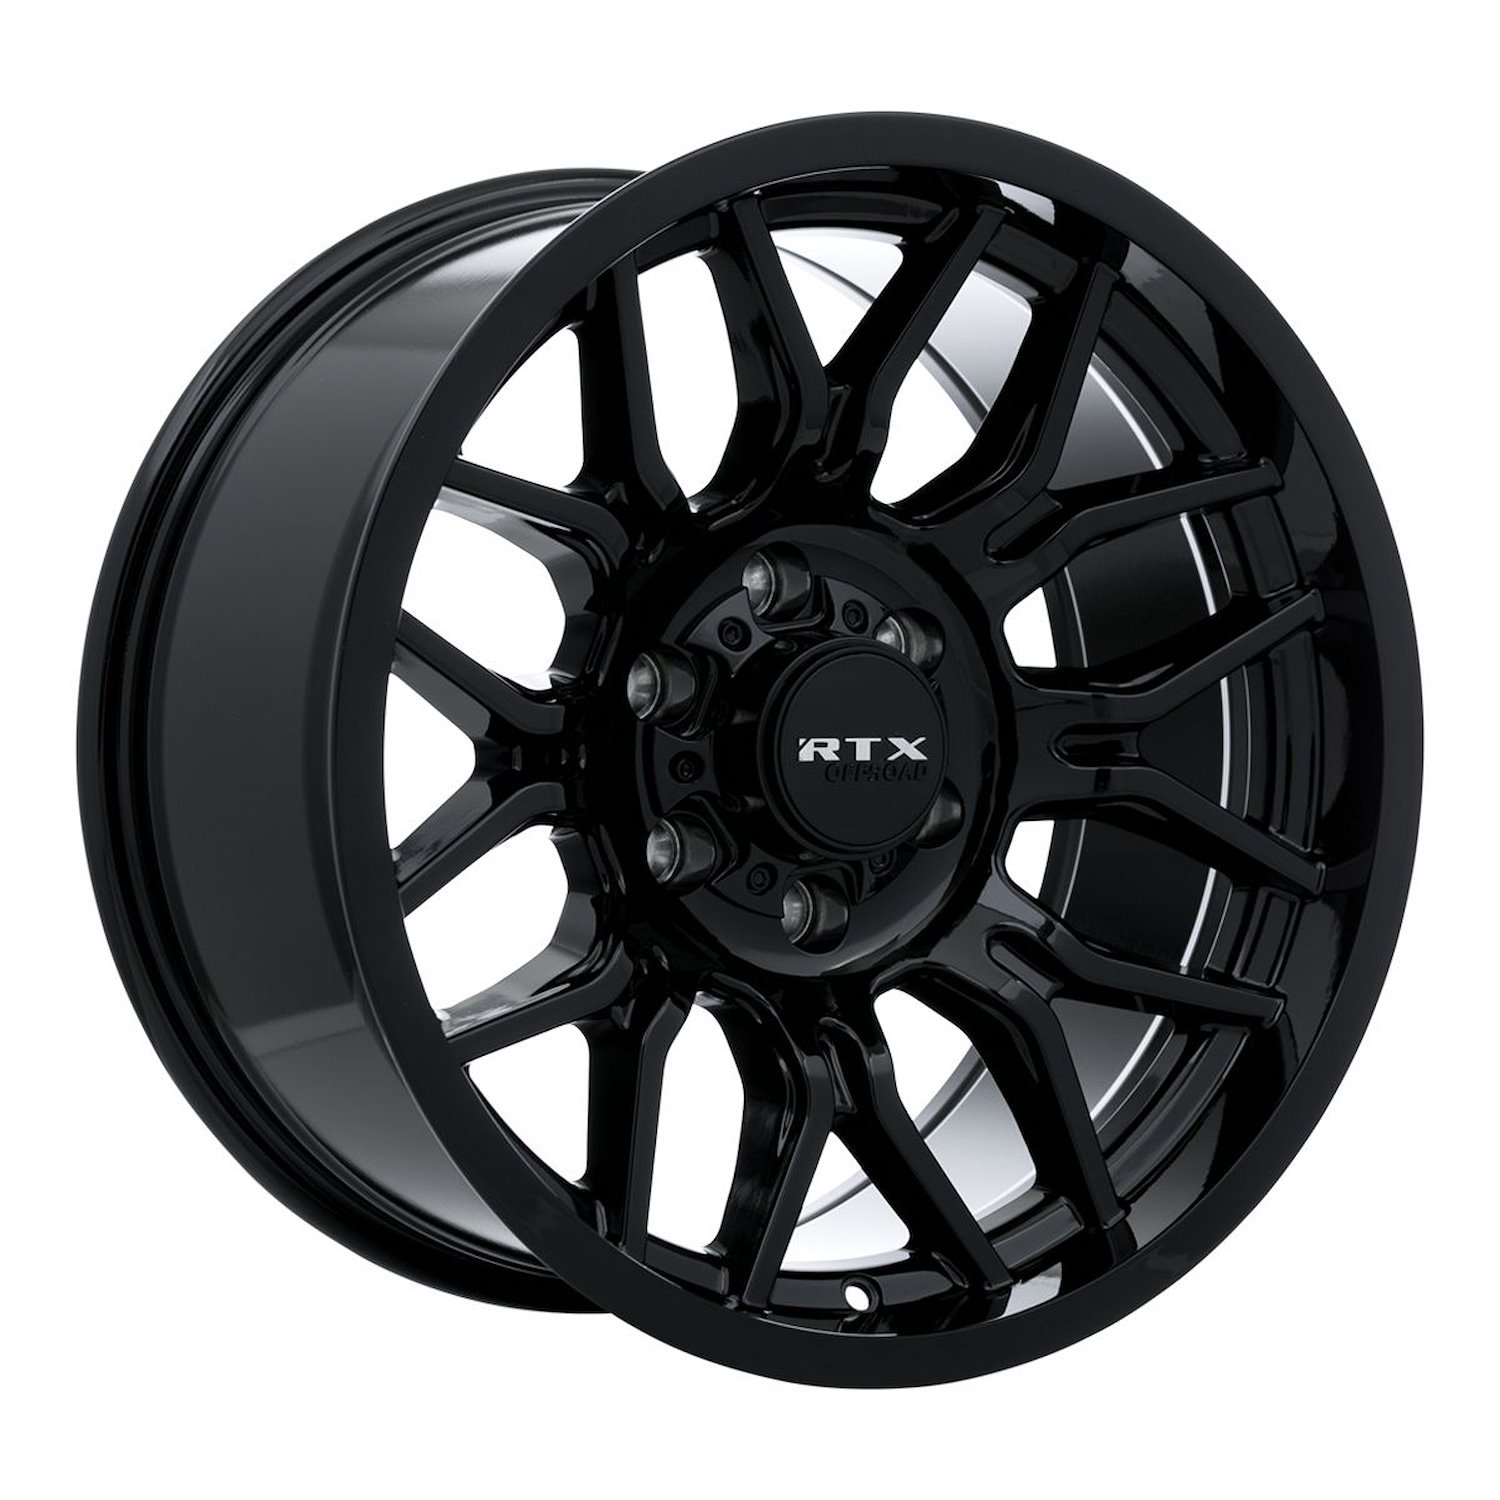 163765 Off-Road Series Claw Wheel [Size: 20" x 10"] Gloss Black Finish